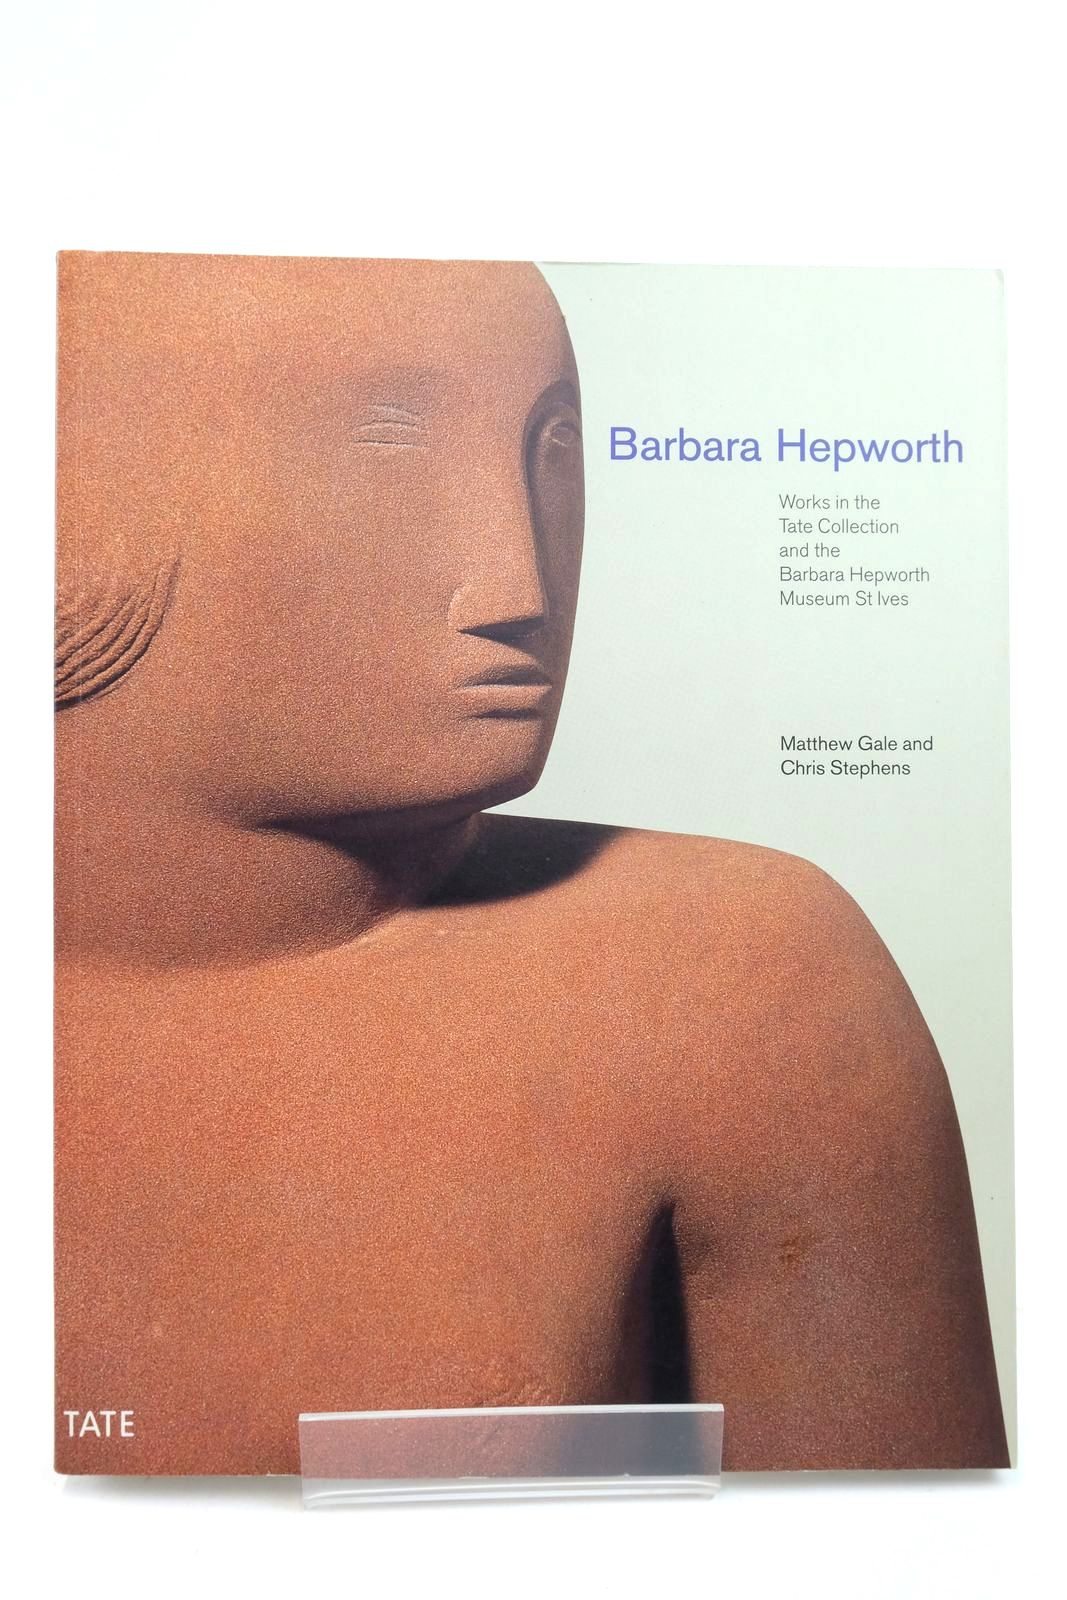 Photo of BARBARA HEPWORTH: WORKS IN THE TATE COLLECTION AND THE BARBARA HEPWORTH MUSEUM ST IVES written by Gale, Matthew Stephens, Chris illustrated by Hepworth, Barbara published by Tate Publishing (STOCK CODE: 2140814)  for sale by Stella & Rose's Books